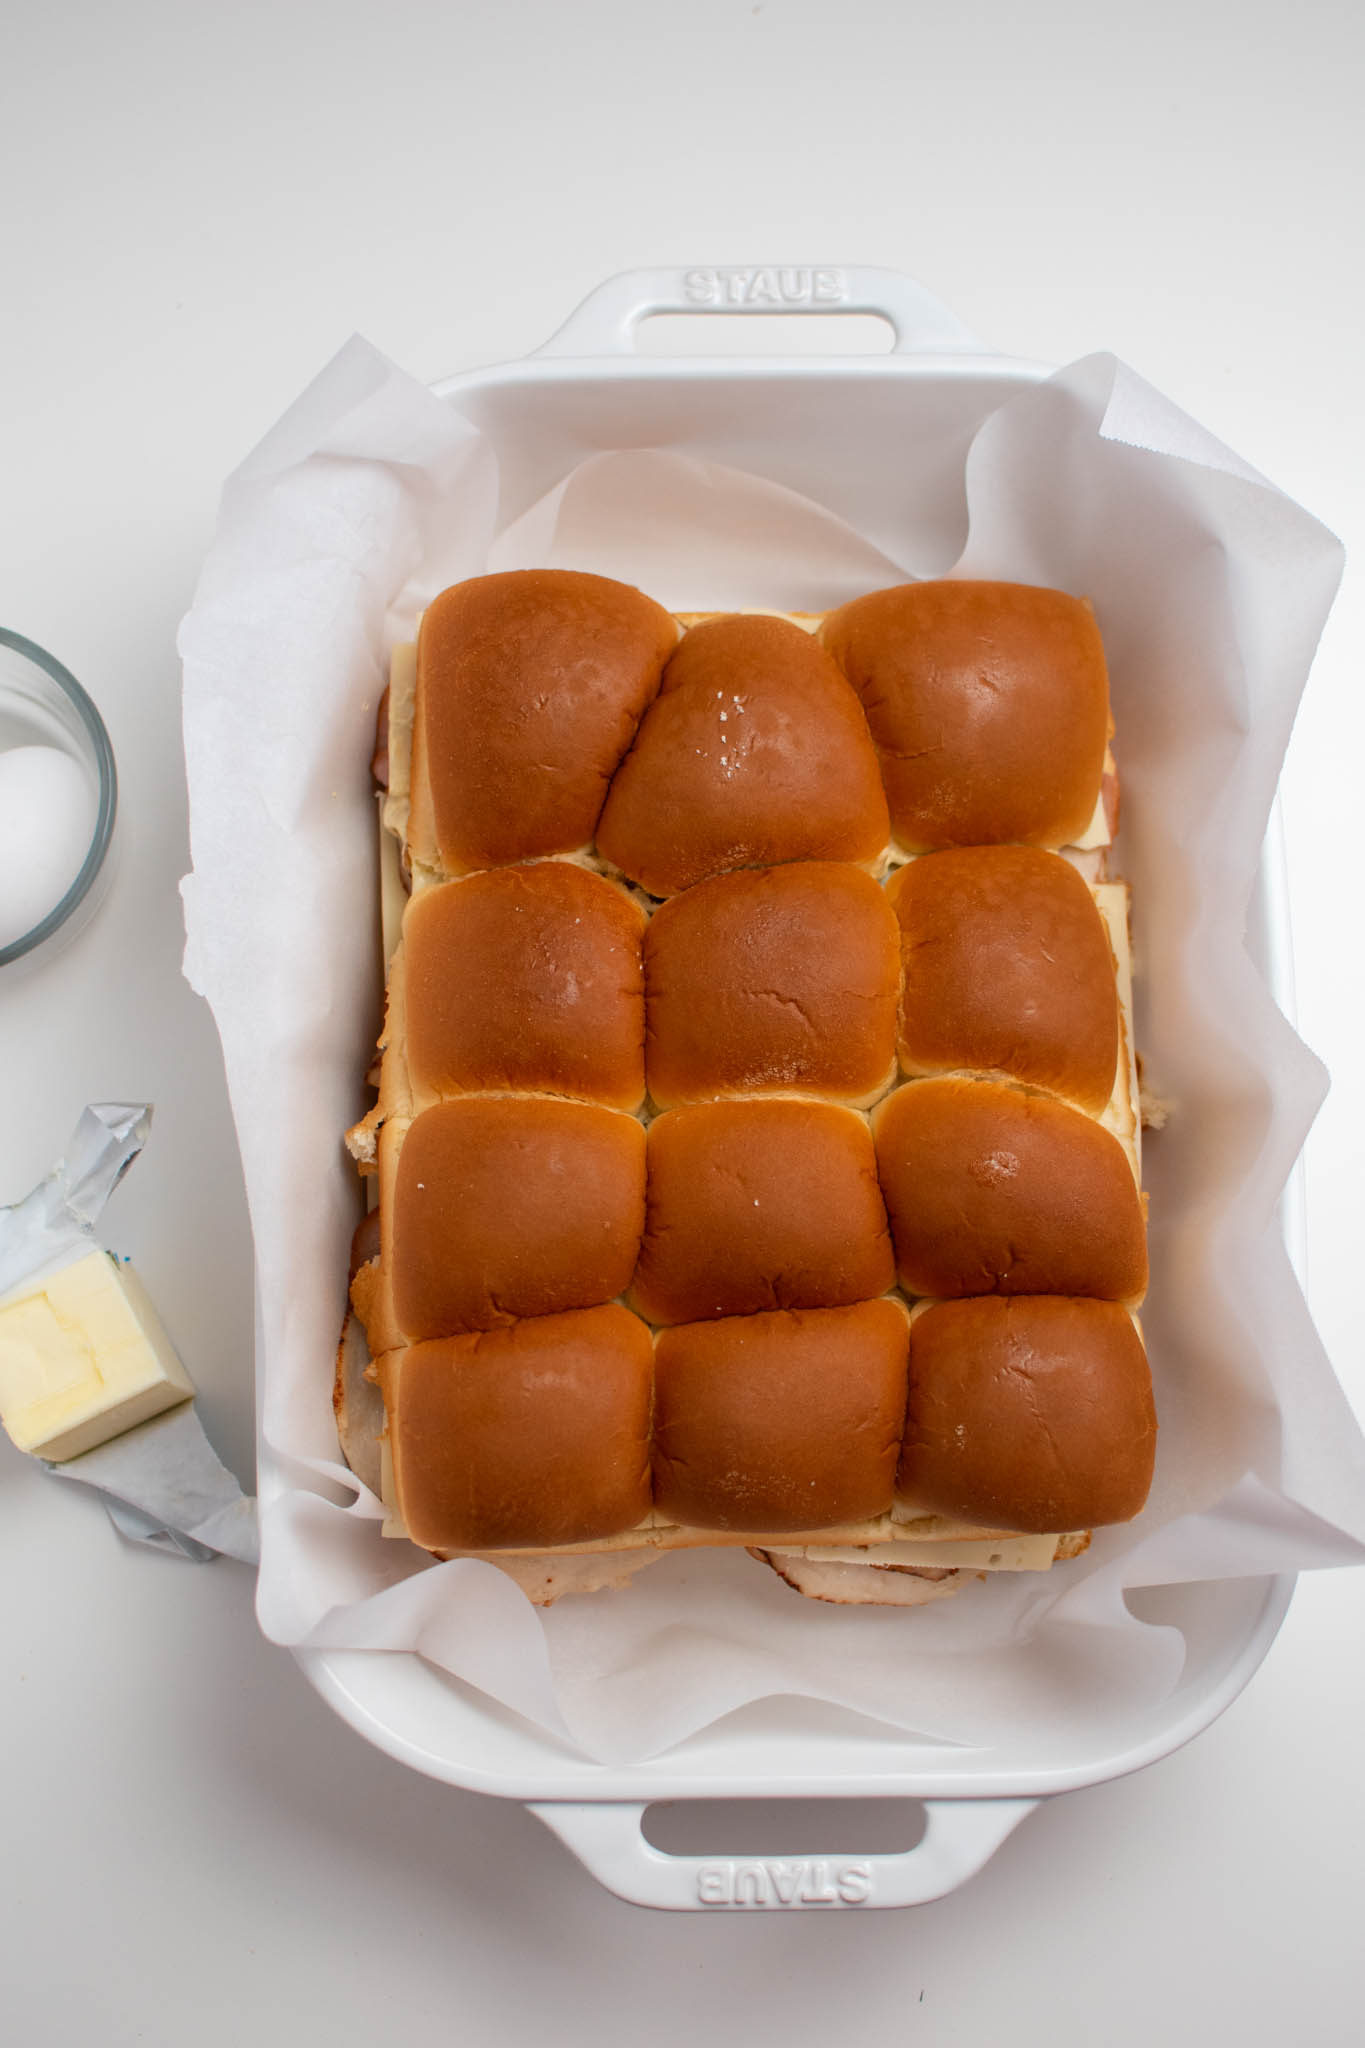 Unbaked sliders in white baking dish with parchment paper.